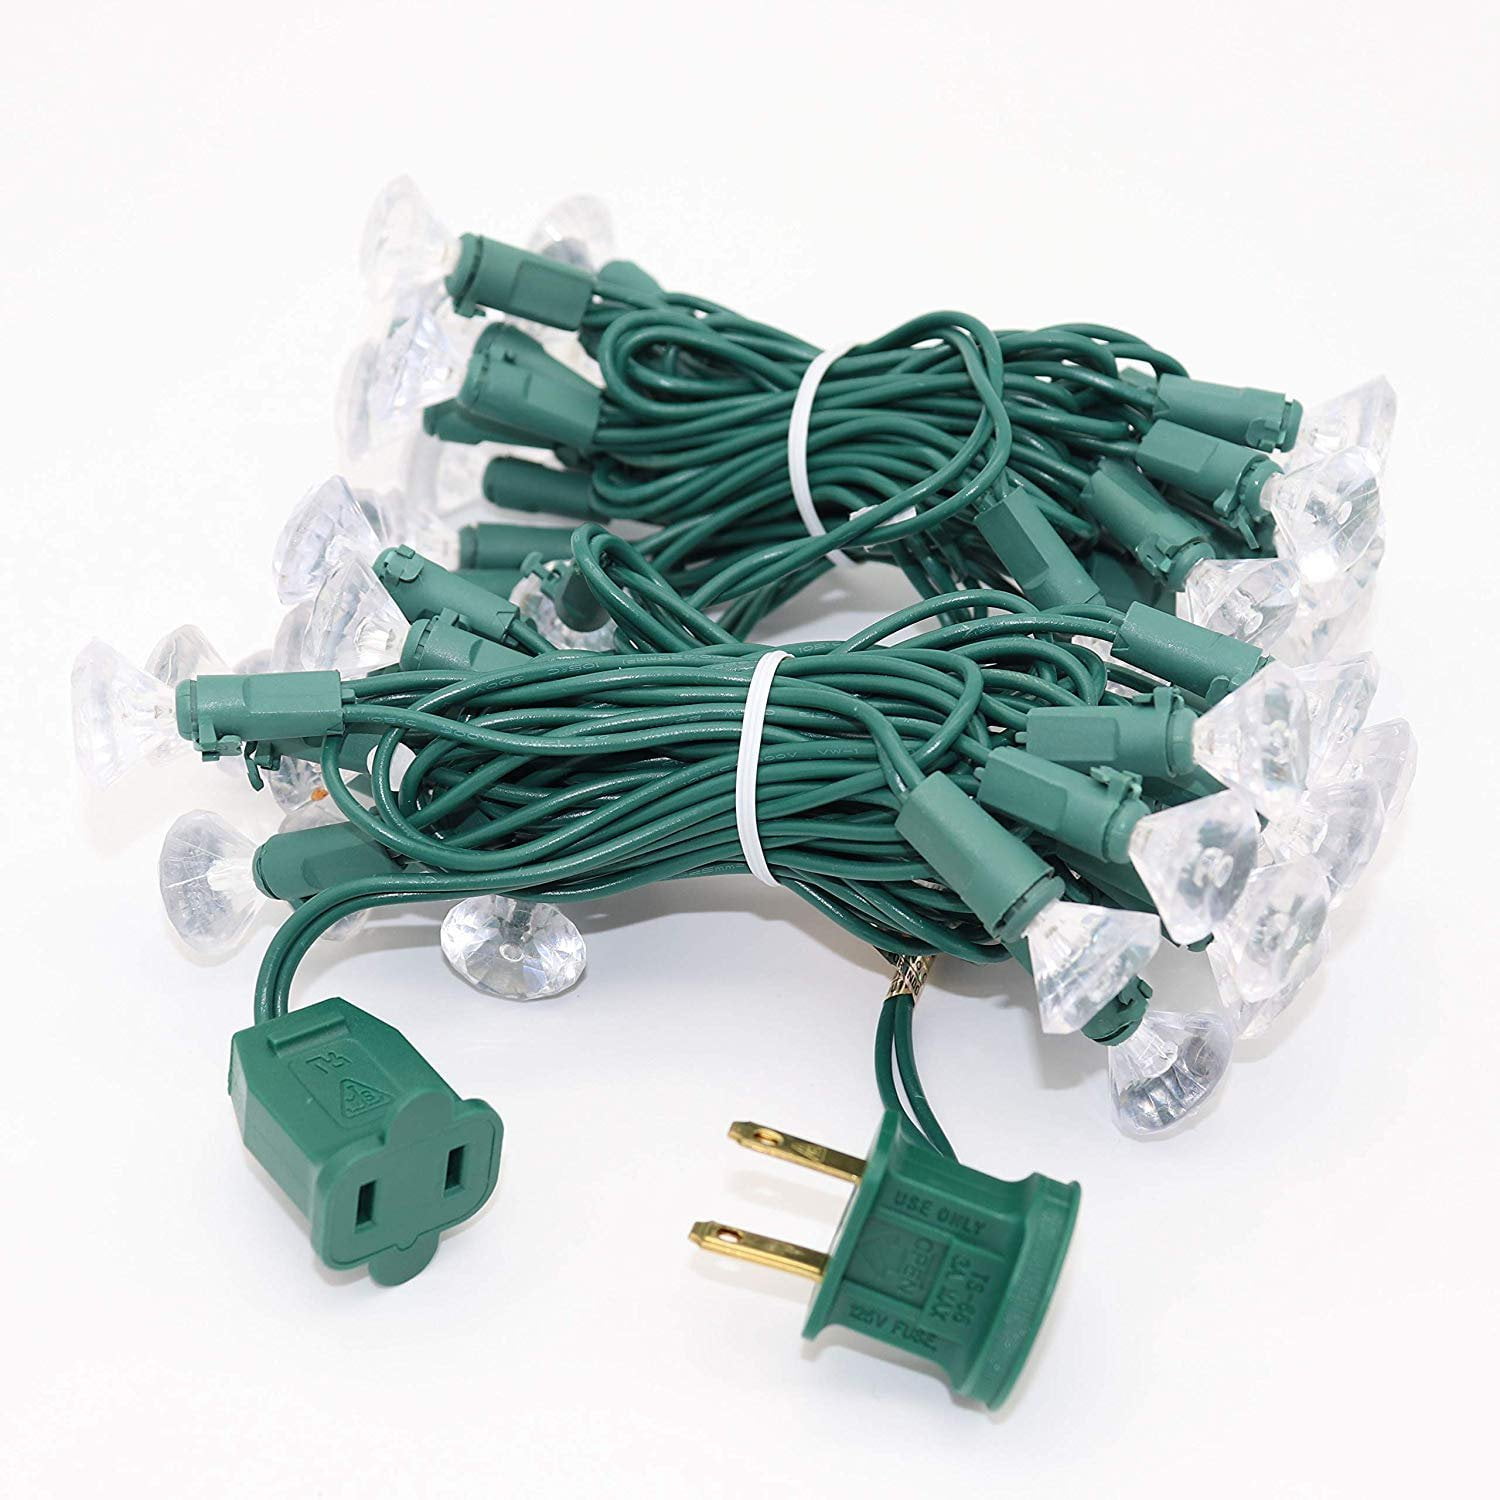 Lot 4 Boxes Of GE CLEAR Christmas Replacement Bulbs C9 20 Lights Indoor/outdoor 